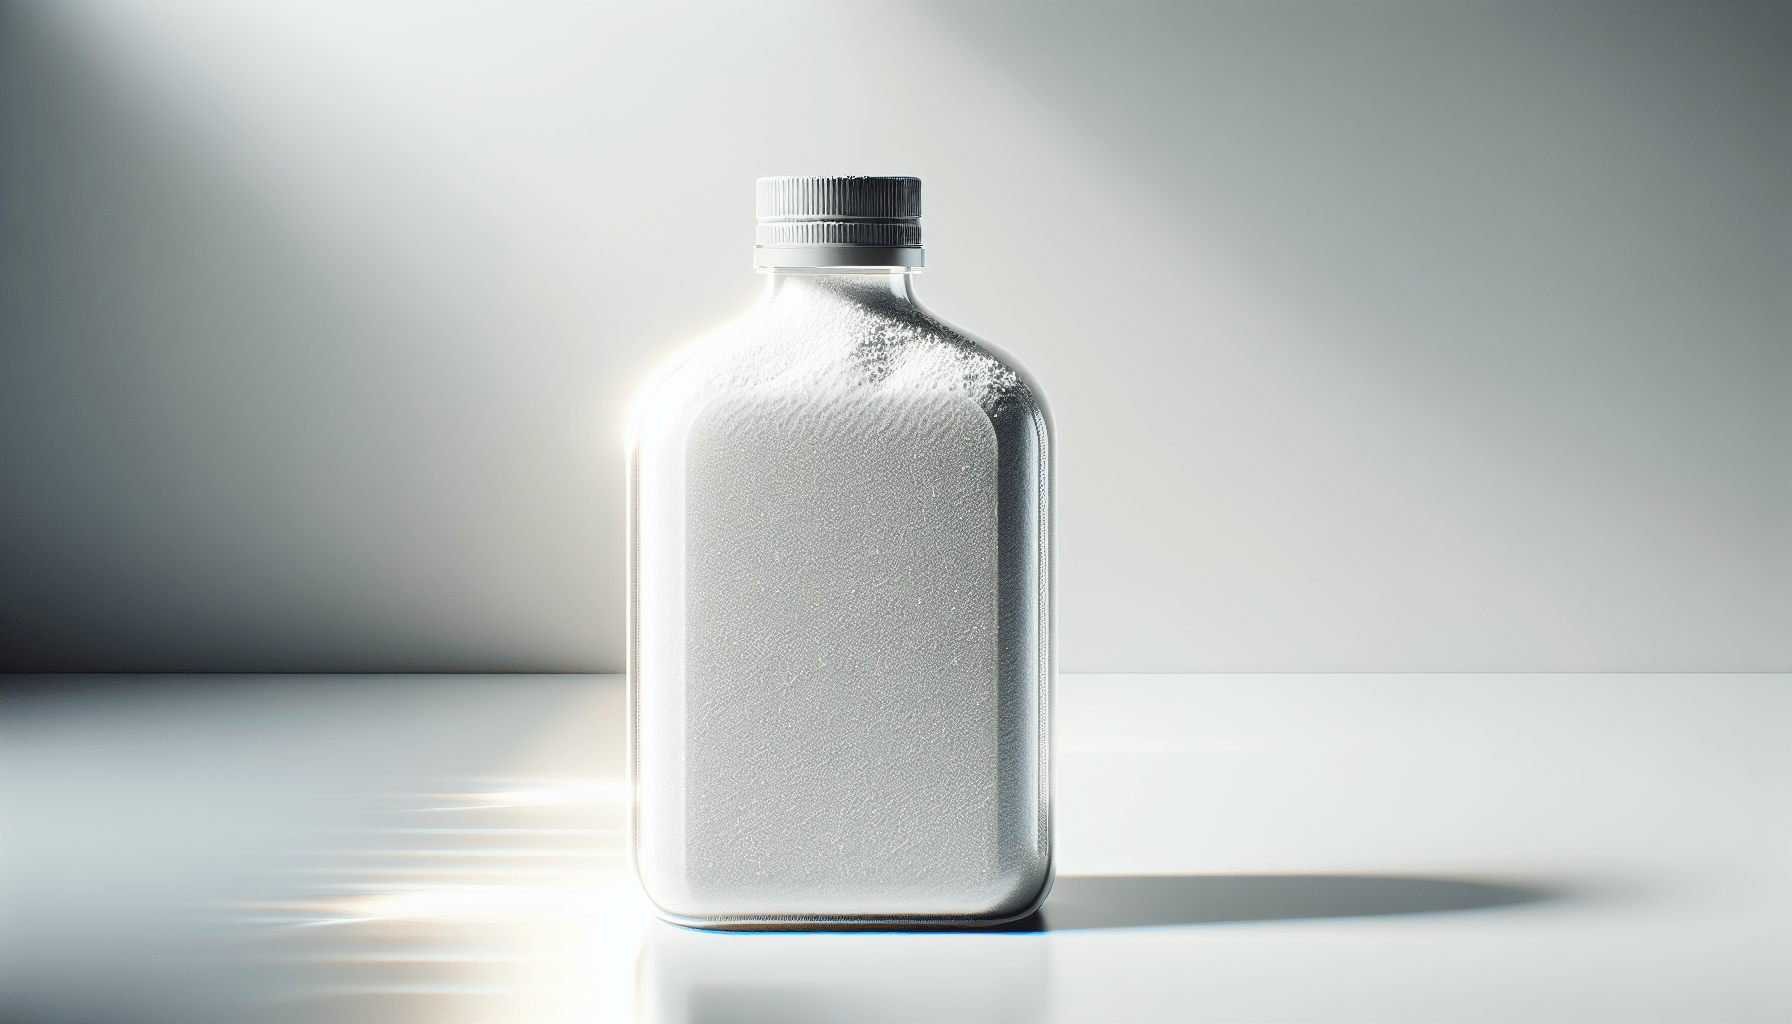 liqcreate-launches-new-chemical-resistant-resin-for-3d-printing-industry Liqcreate Launches New Chemical-Resistant Resin for 3D Printing Industry